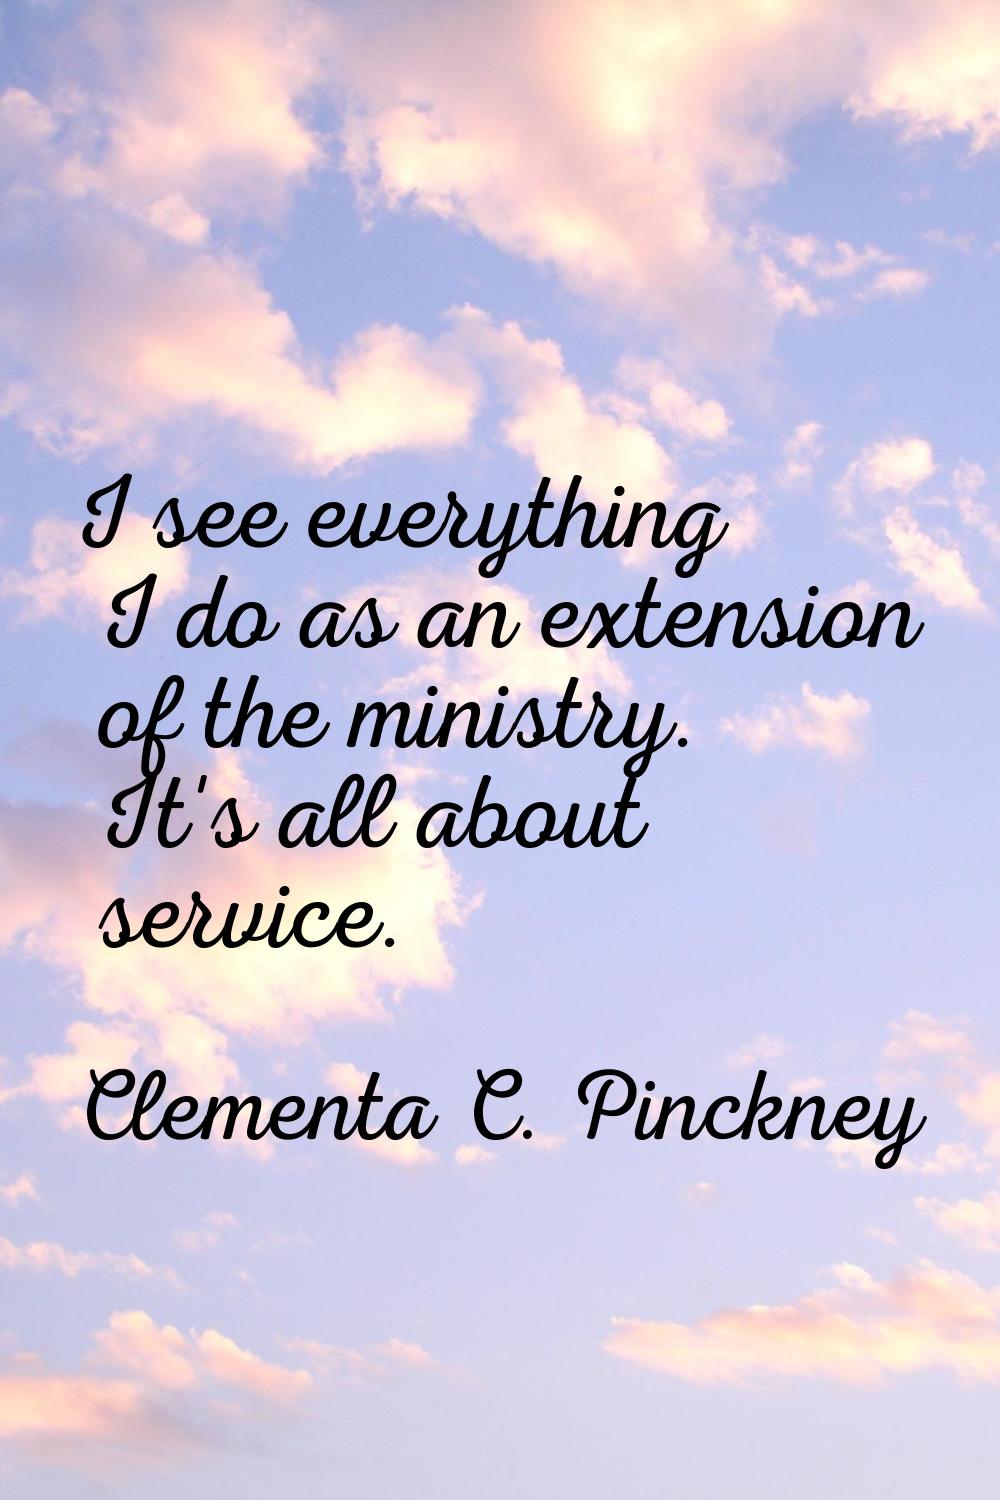 I see everything I do as an extension of the ministry. It's all about service.